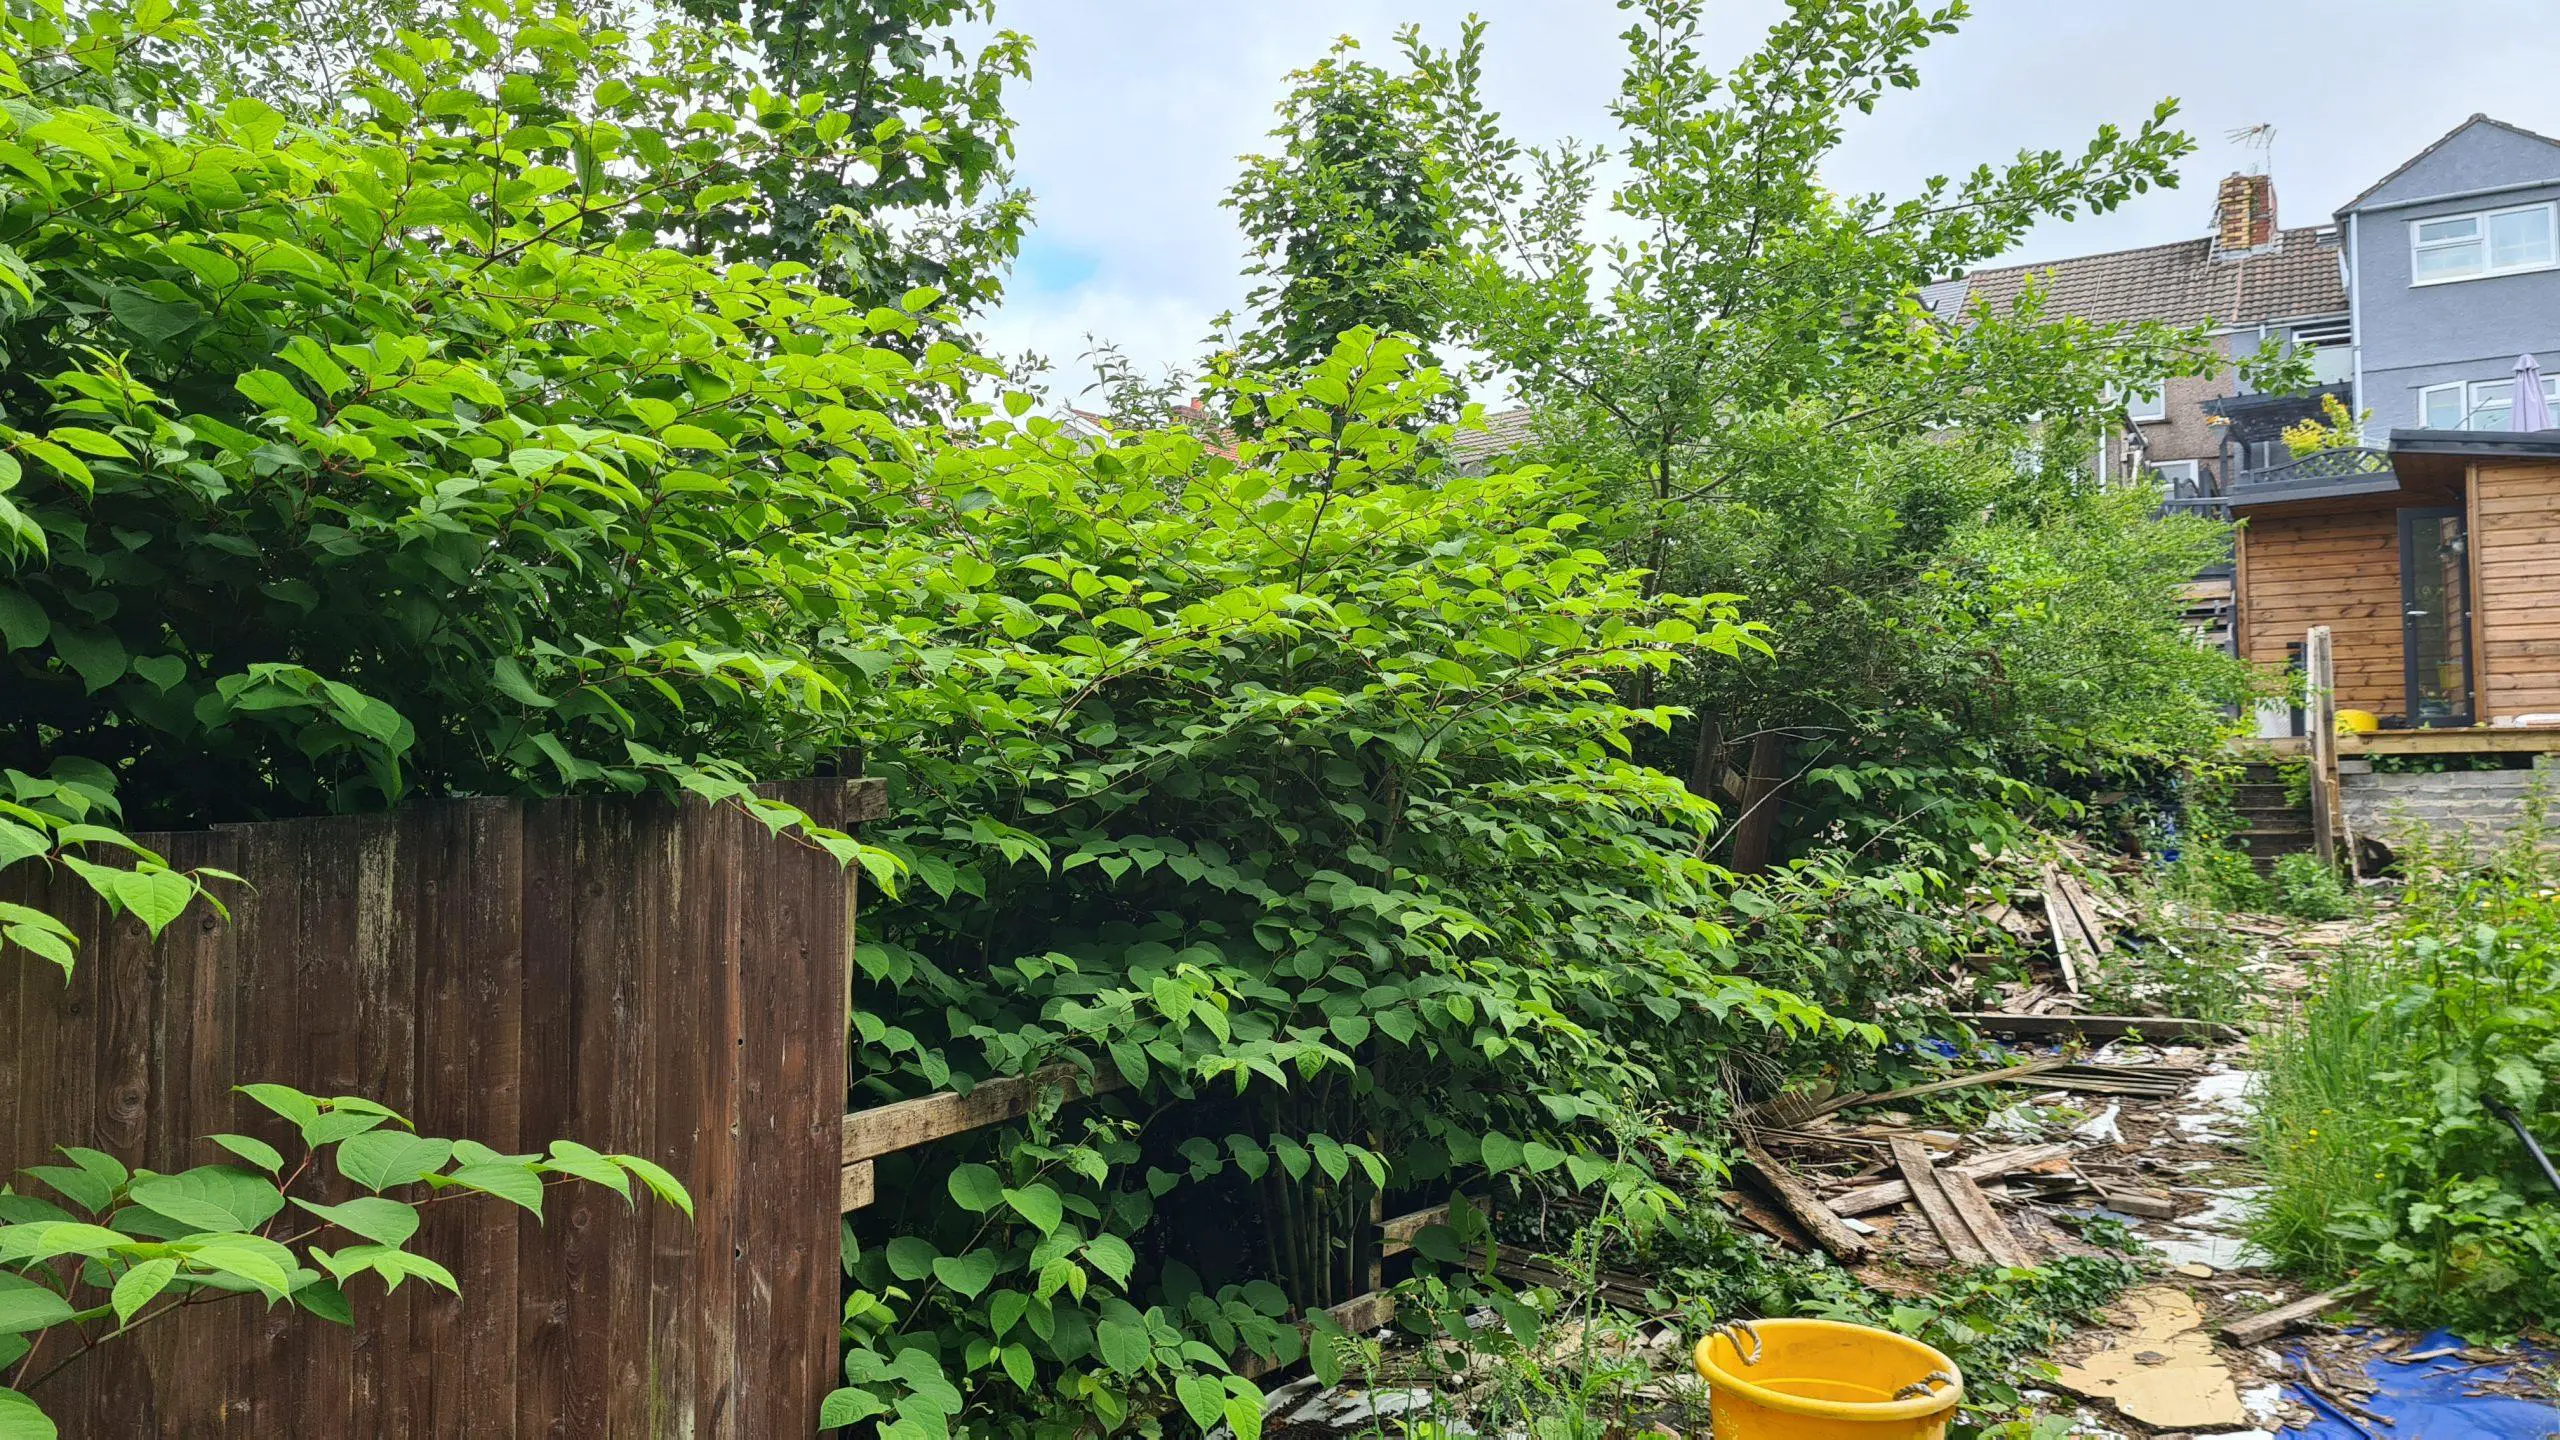 The need to kill Japanese knotweed on your property to prevent it from consuming your land too